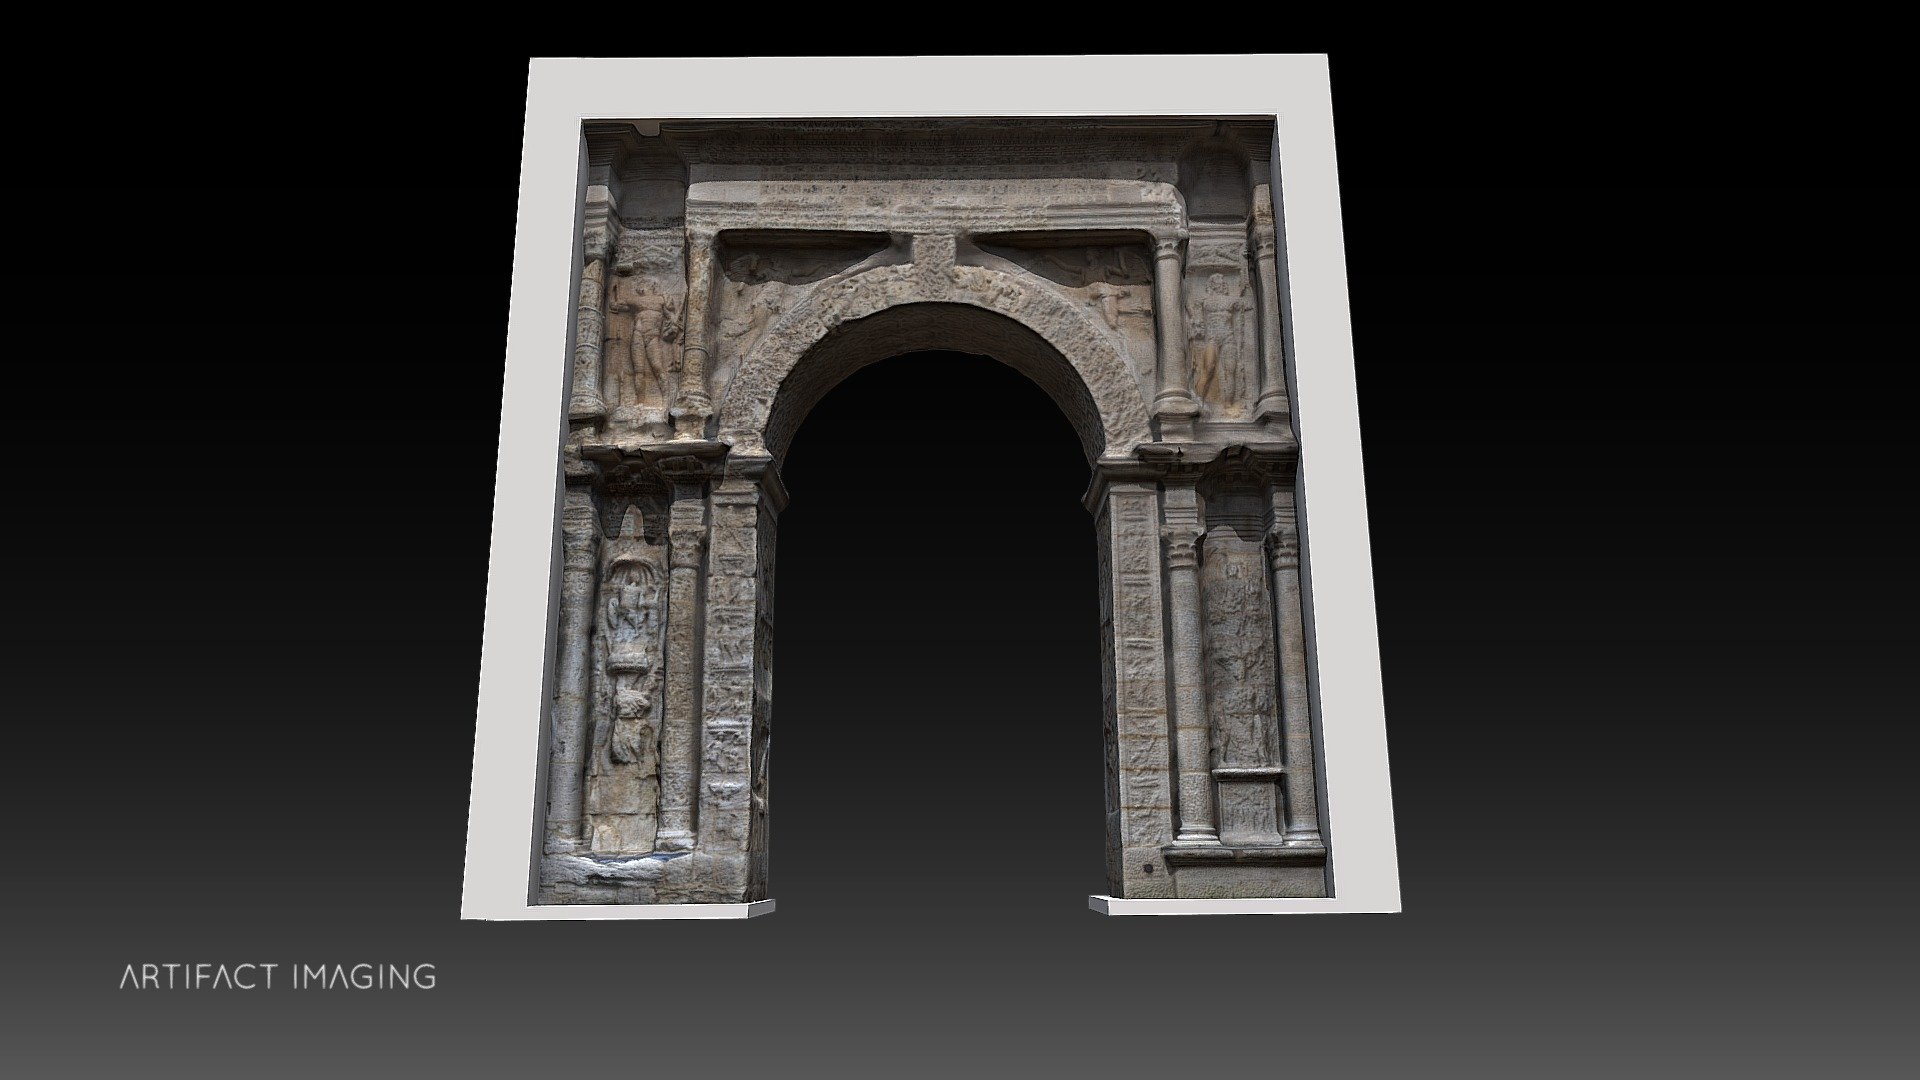 A test on the Porte Noire of Besançon (Vesontio, Gallia)



Circa 175 A.D., under Marcus Aurelius - 16.56 m high



Photogrammetry from the ground and with a weak equipment, explaining the defects on the high parts and the deformations. The project is to implement the existing traditional surveys and eventually produce a model rendering the sets and volumes missing. A work in progress so.



Learn more about this triumphal arch, its decor and dating:



Walter, H. (1986), La Porte noire de Besançon. Contribution à l'étude de l'art triomphal des Gaules, 2 tomes,  Presses Univ. Franche-Comté. Collection de l'Institut des Sciences et Techniques de l'Antiquité, 321 3d model